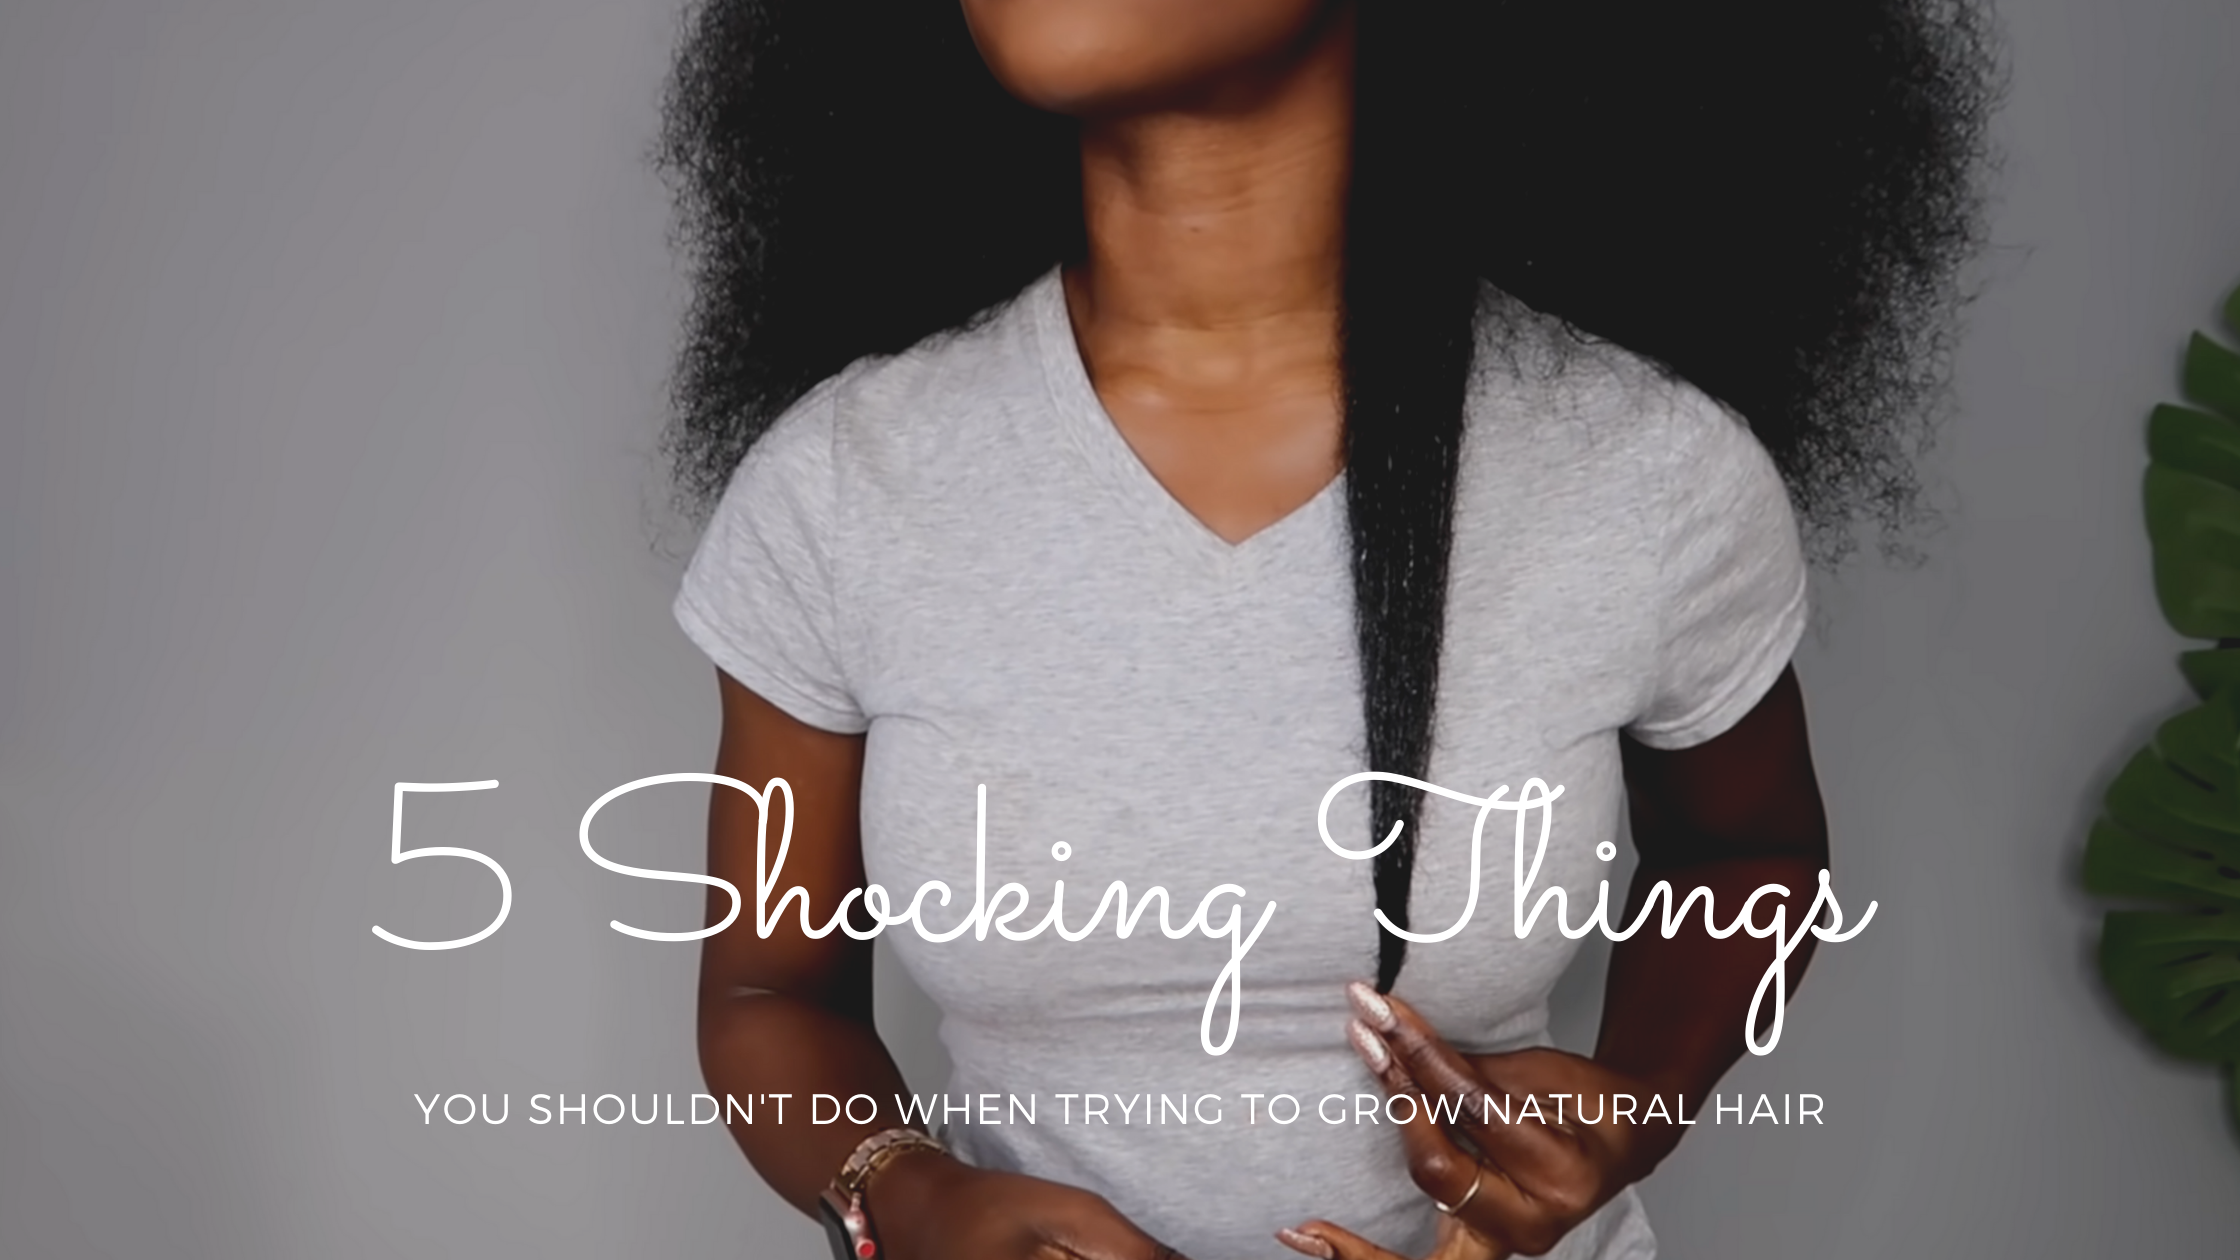 How To Make Your Natural Hair Grow Faster By Not Doing These 5 Shockingly  Obvious Things ⋆ African American Hairstyle Videos - AAHV